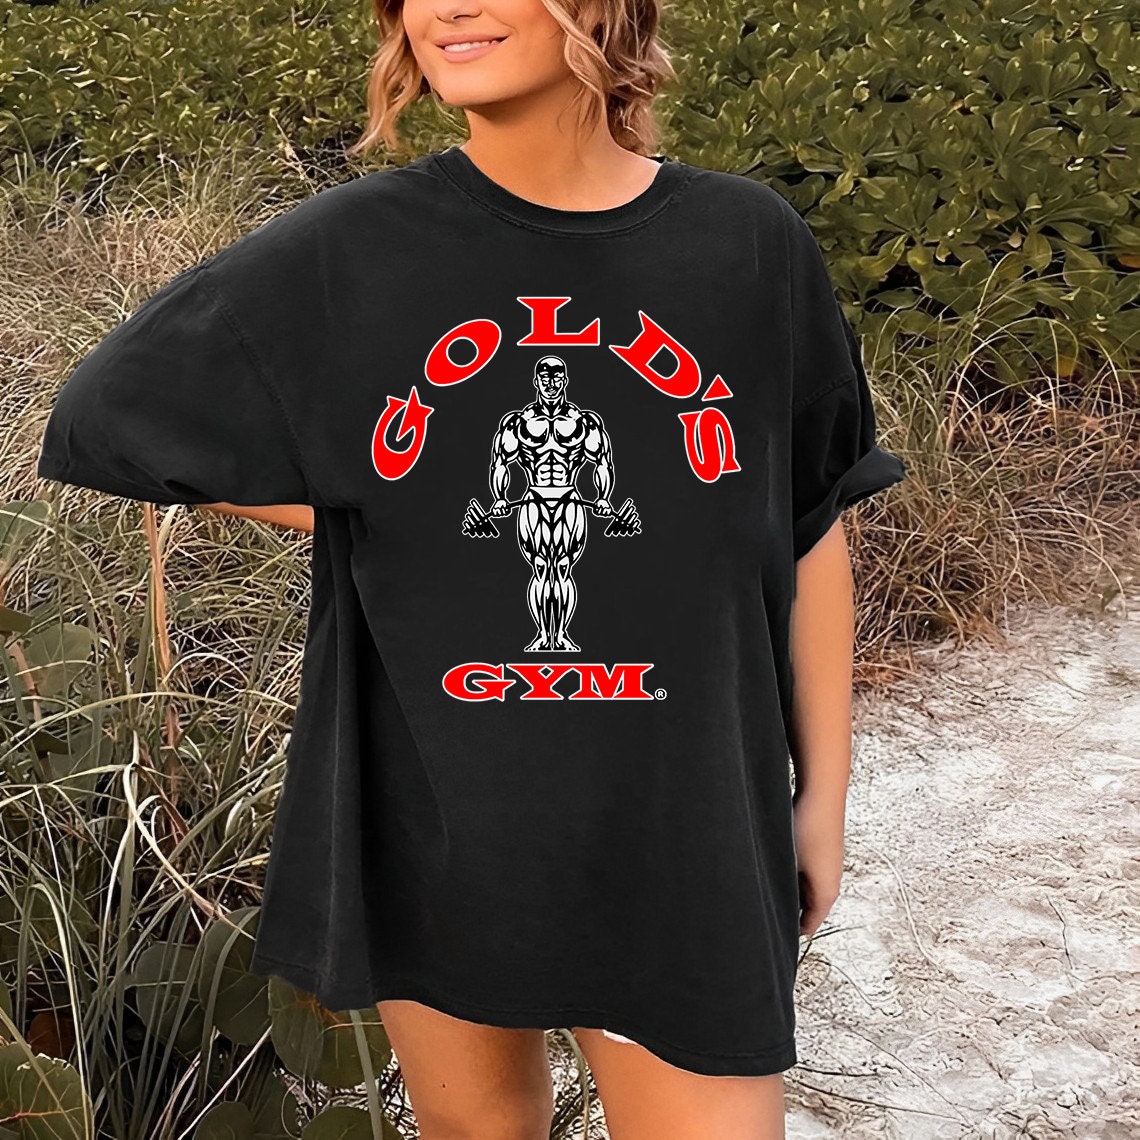 Vintage Fitness Retro Gym Group Gold Gym 1982 Fitness - Gym Quote